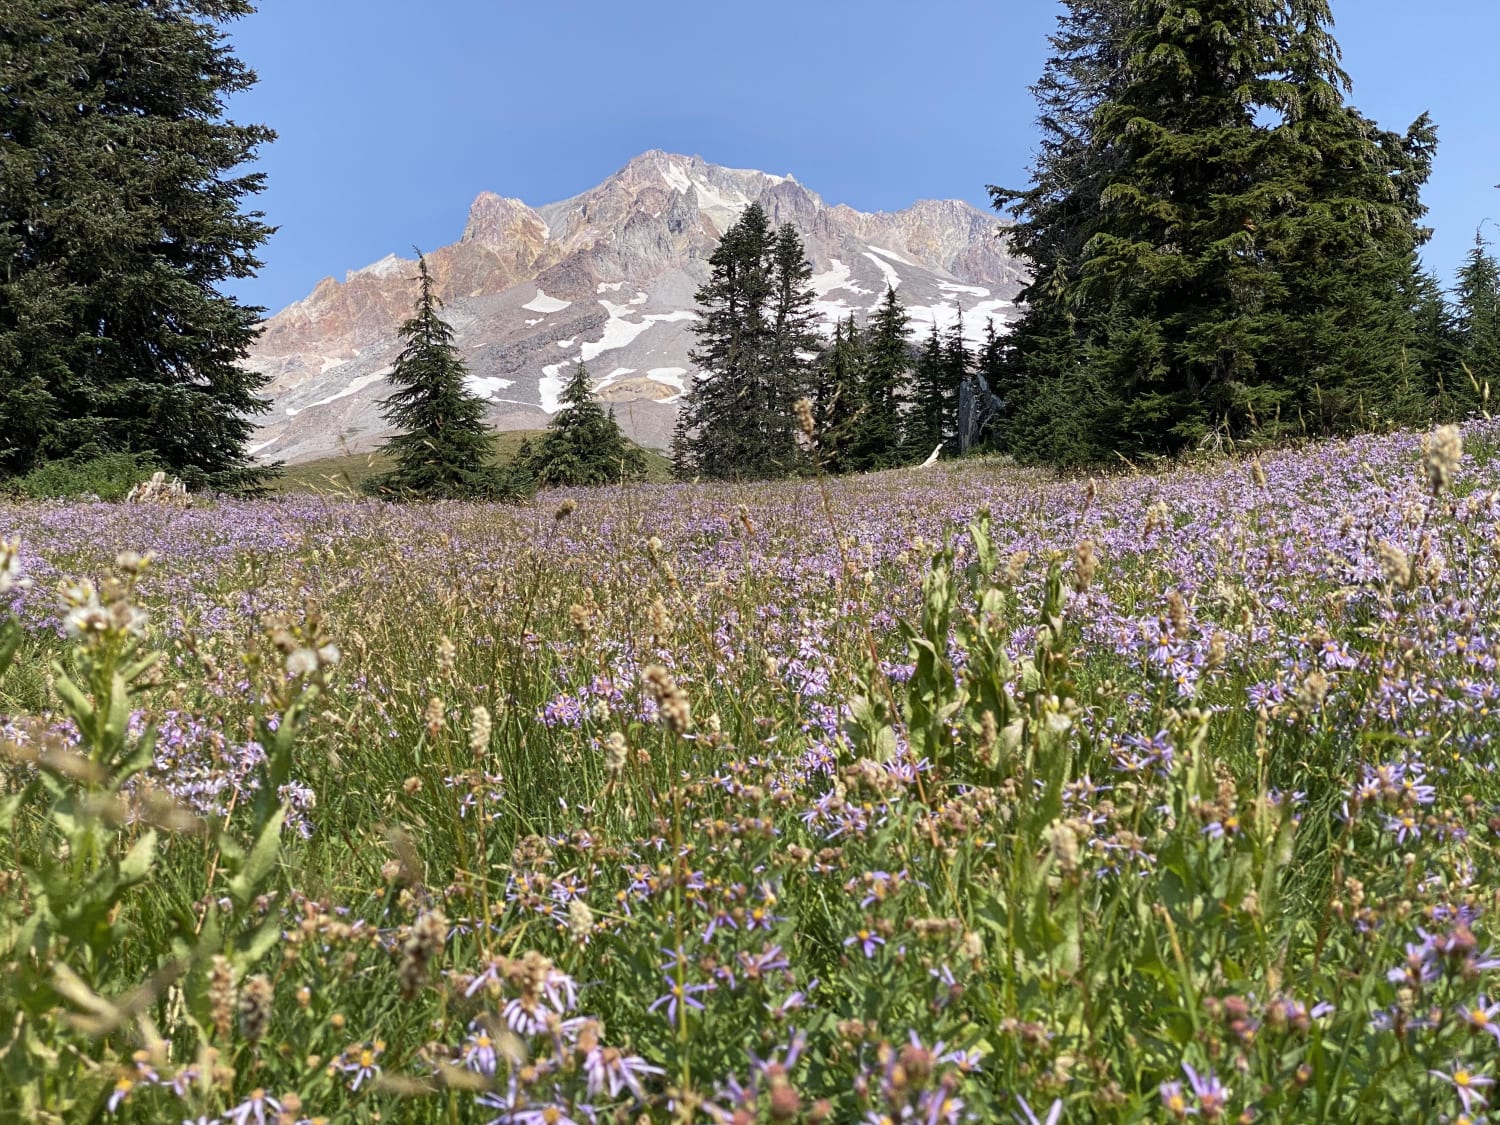 Mount Hood (OR) - from the wildflowers in Paradise Park